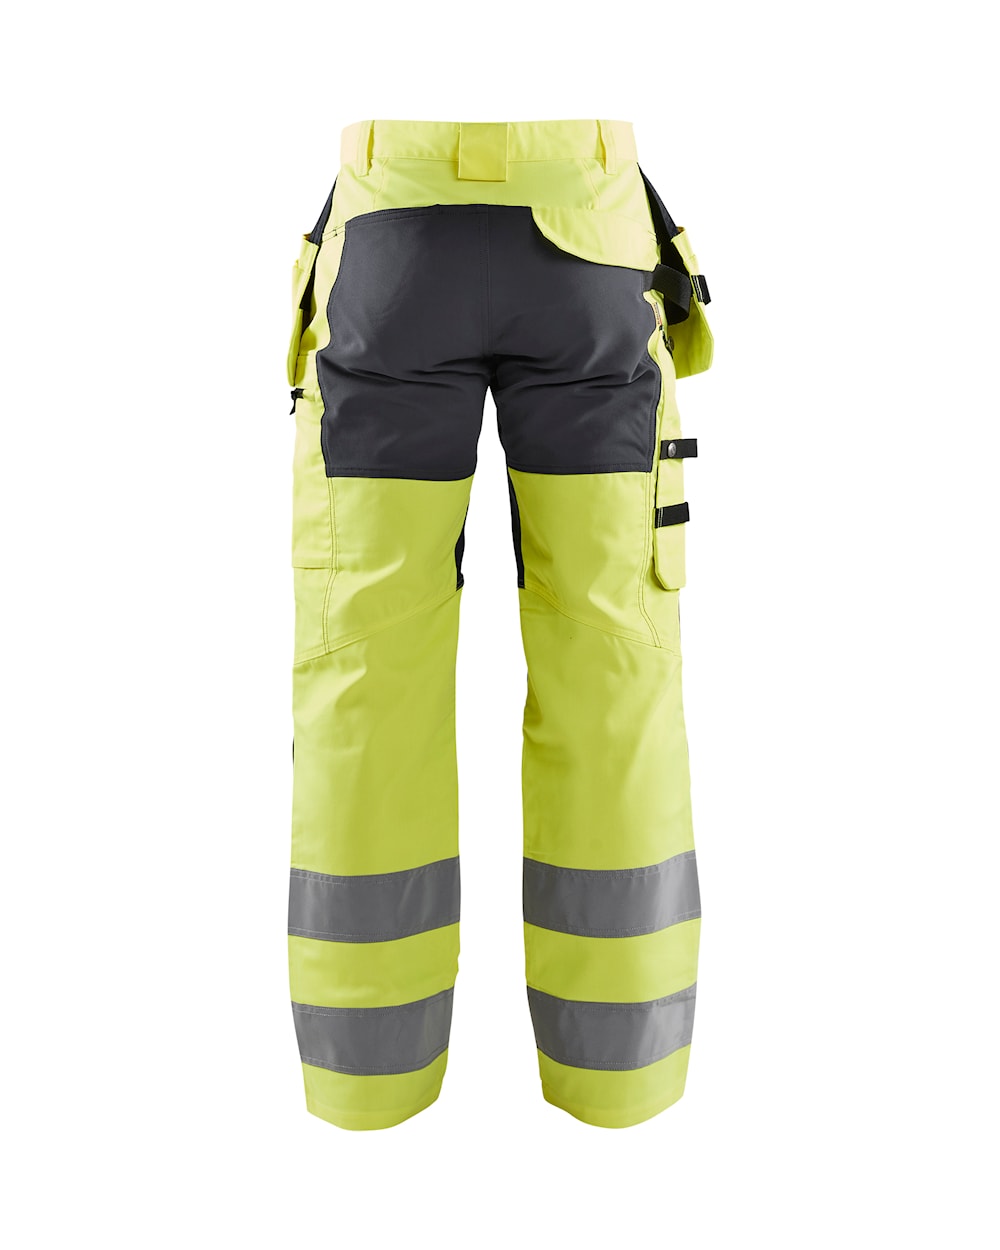 Blaklader Hi-Vis Trousers with Stretch 1552 - Hi-Vis Yellow/Mid Grey